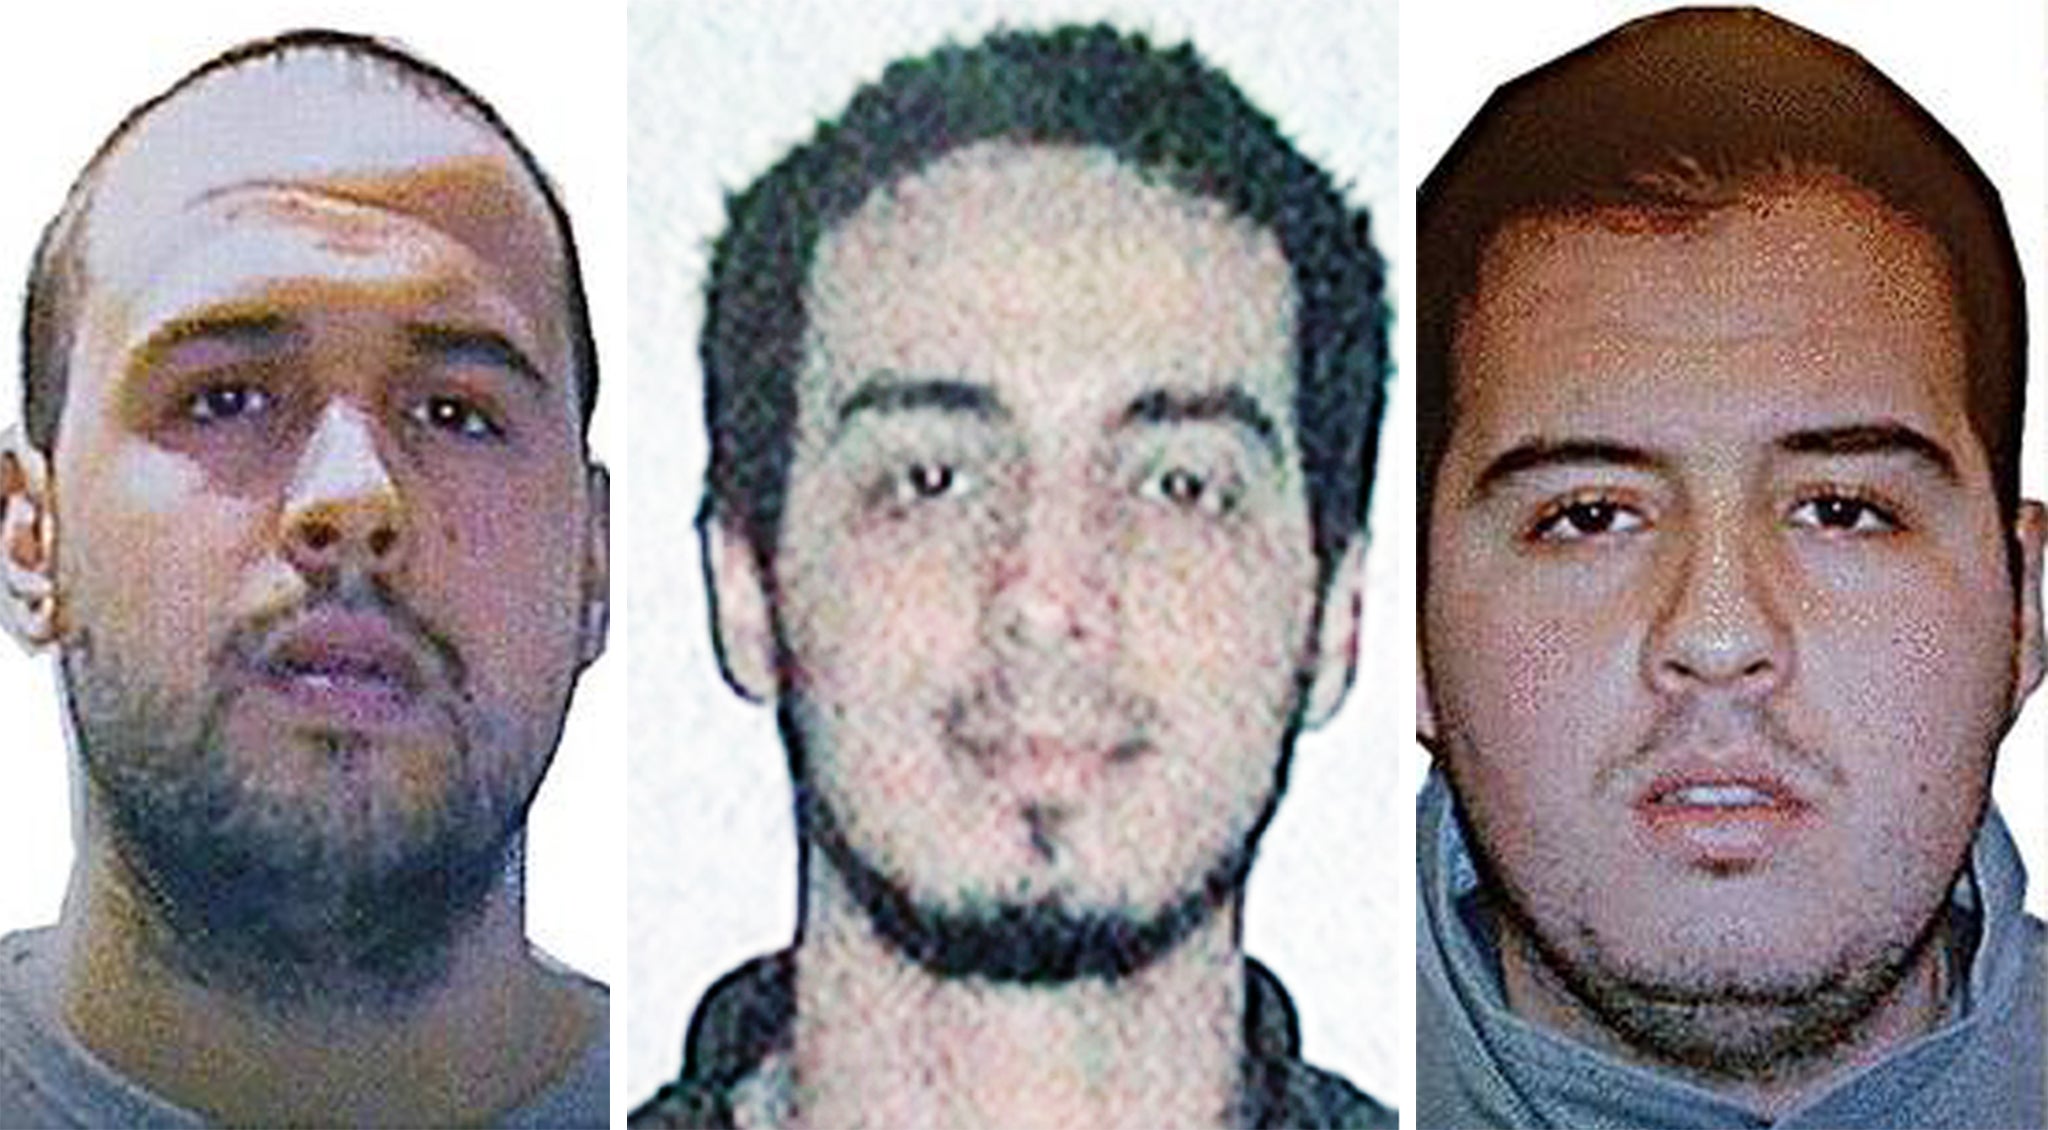 Khalid el-Bakraoui, Najim Laachraoui and Ibrahim el-Bakraoui have been named as suspects in the bombings